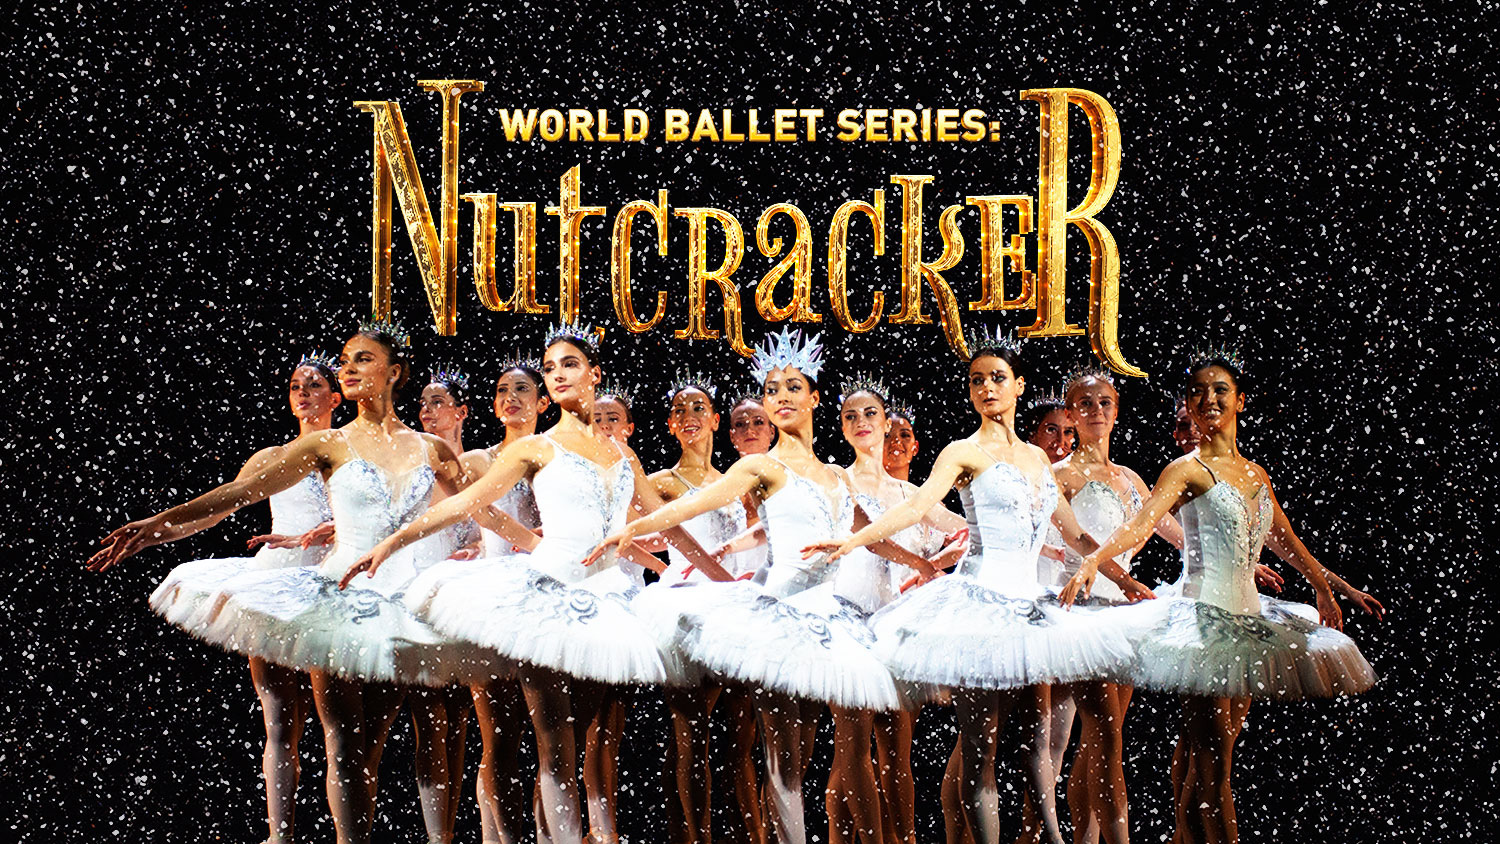 Dancers in white tutus in front of a star field with World Ballet Series Nutcracker text.